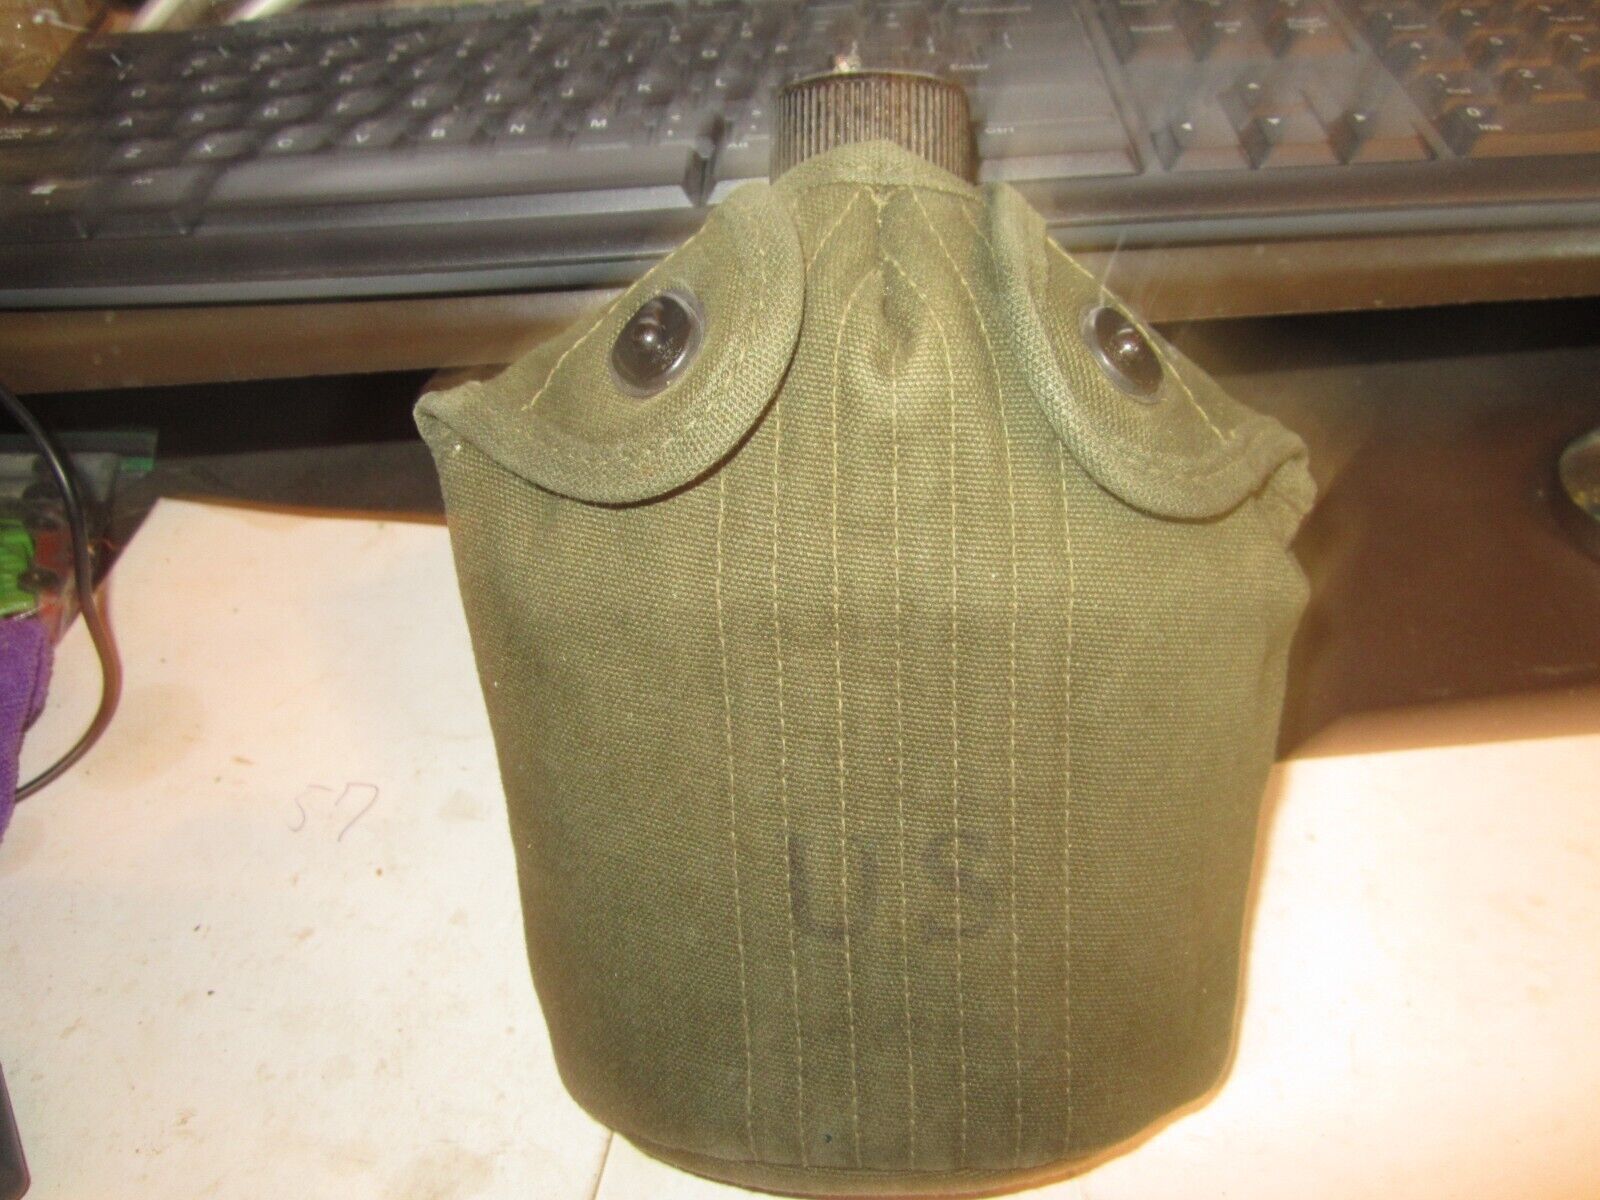 WW2 U.S. Army Canteen S M CO 1945 DATED WITH 1956 COLLETTE MFG 1910 COVER